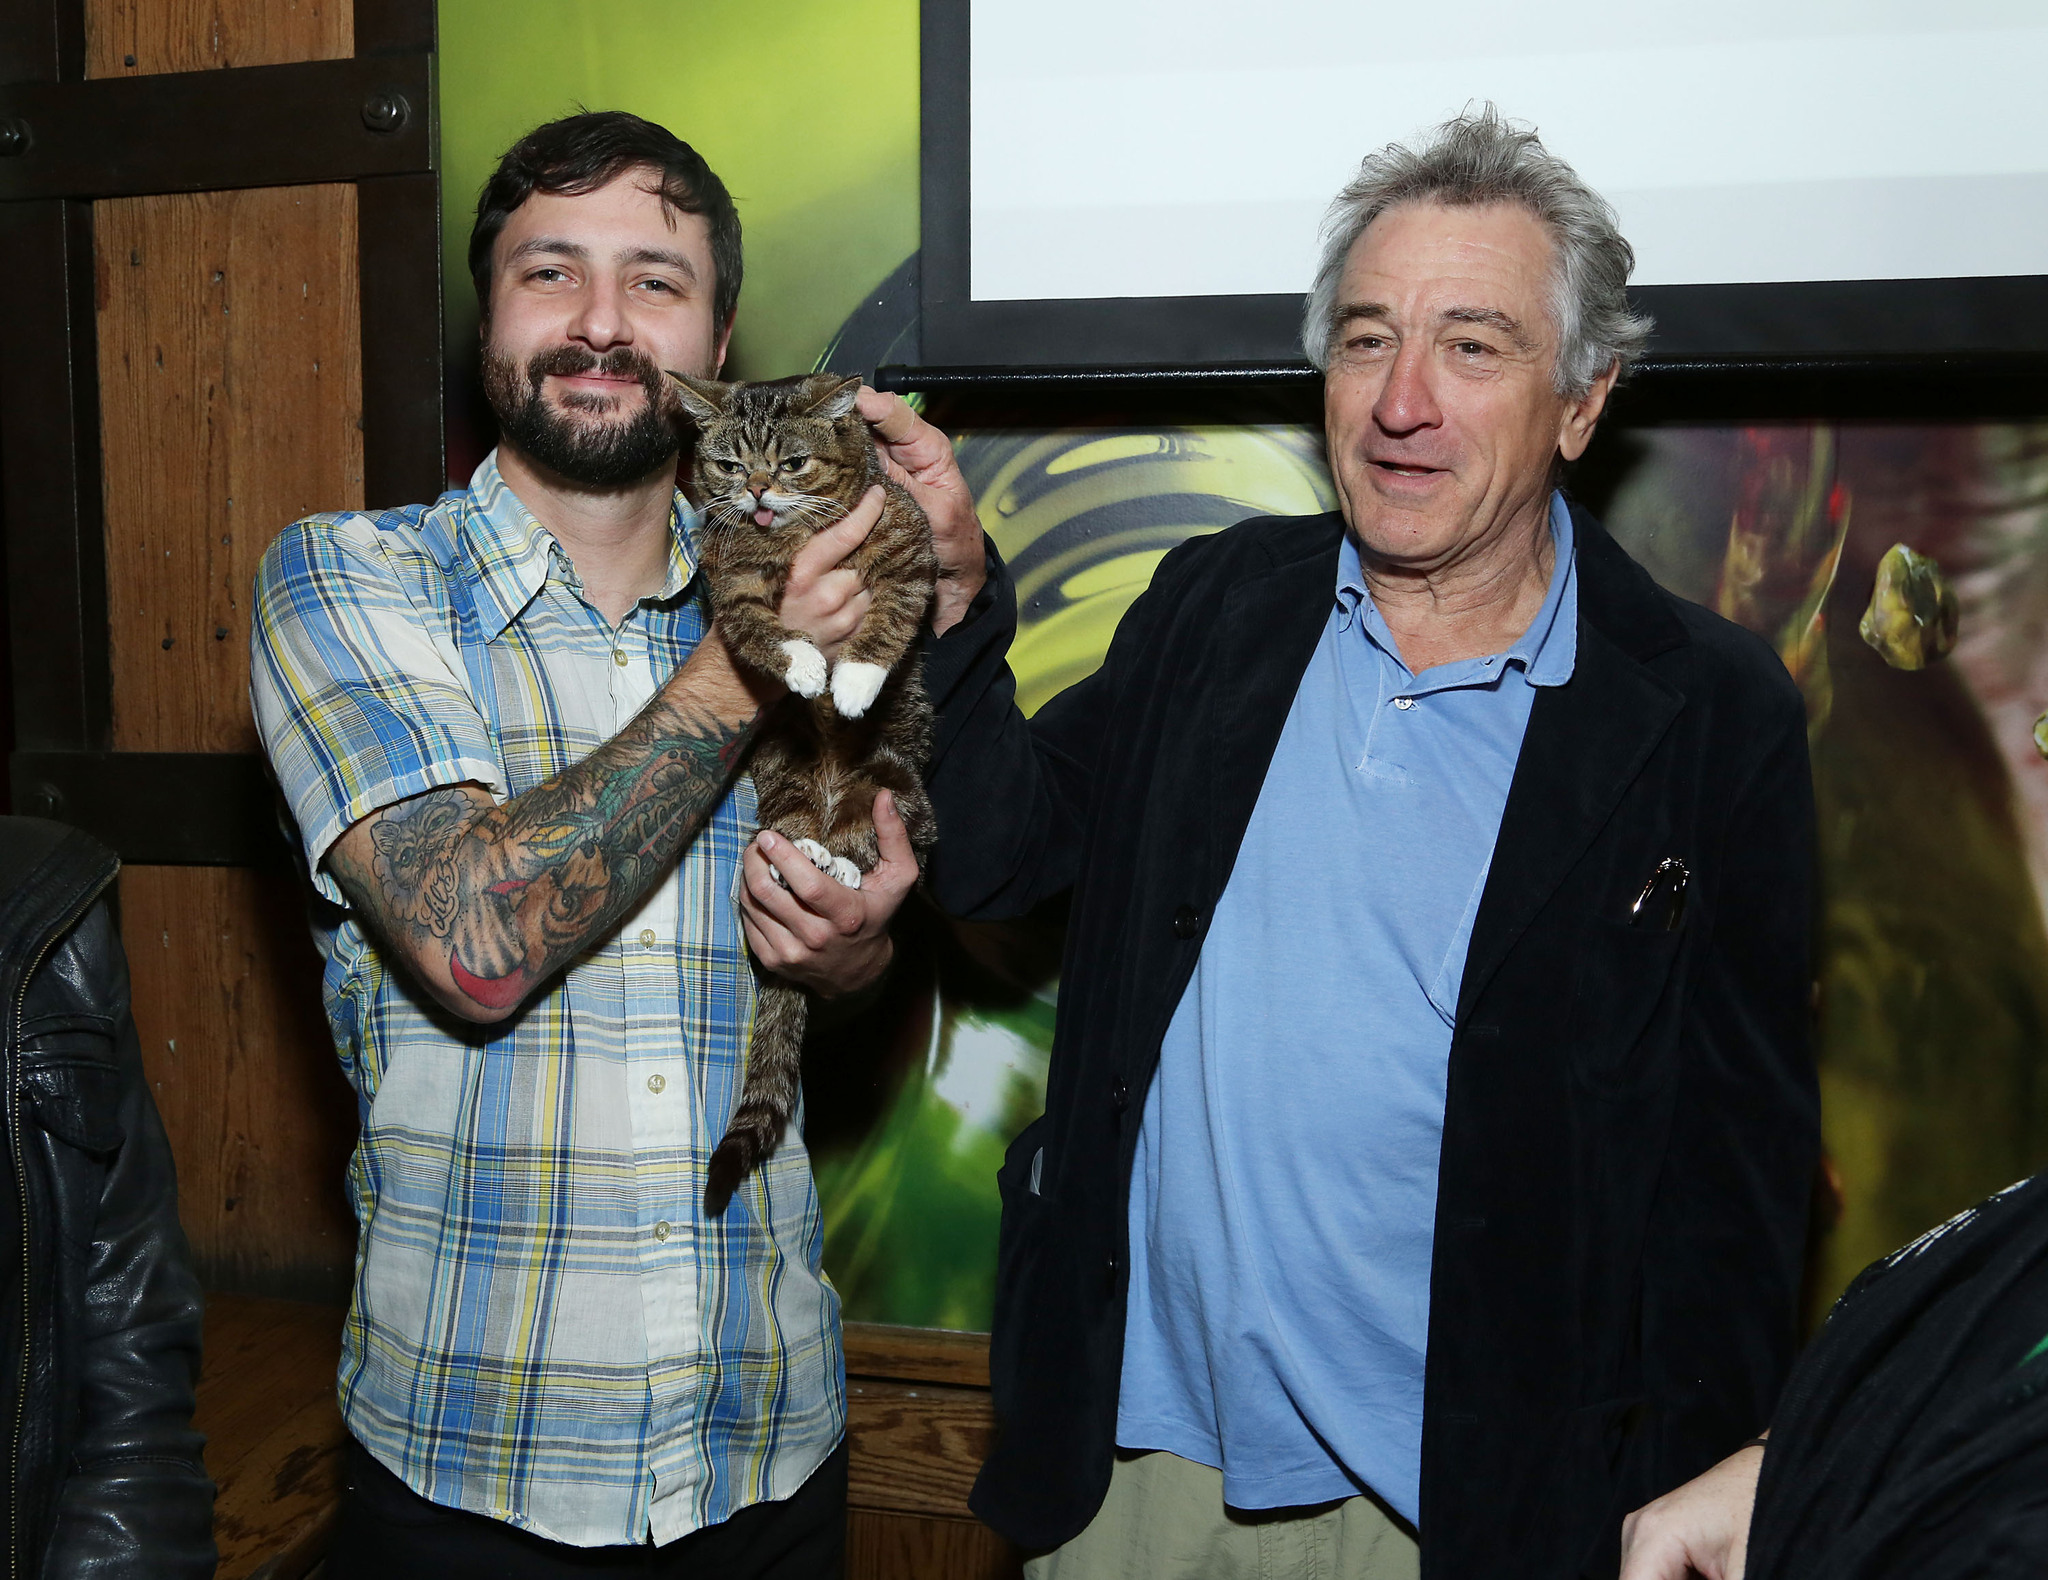 Robert De Niro and cat Lil Bub attend the Directors Brunch during the 2013 Tribeca Film Festival on April 23, 2013 in New York City.